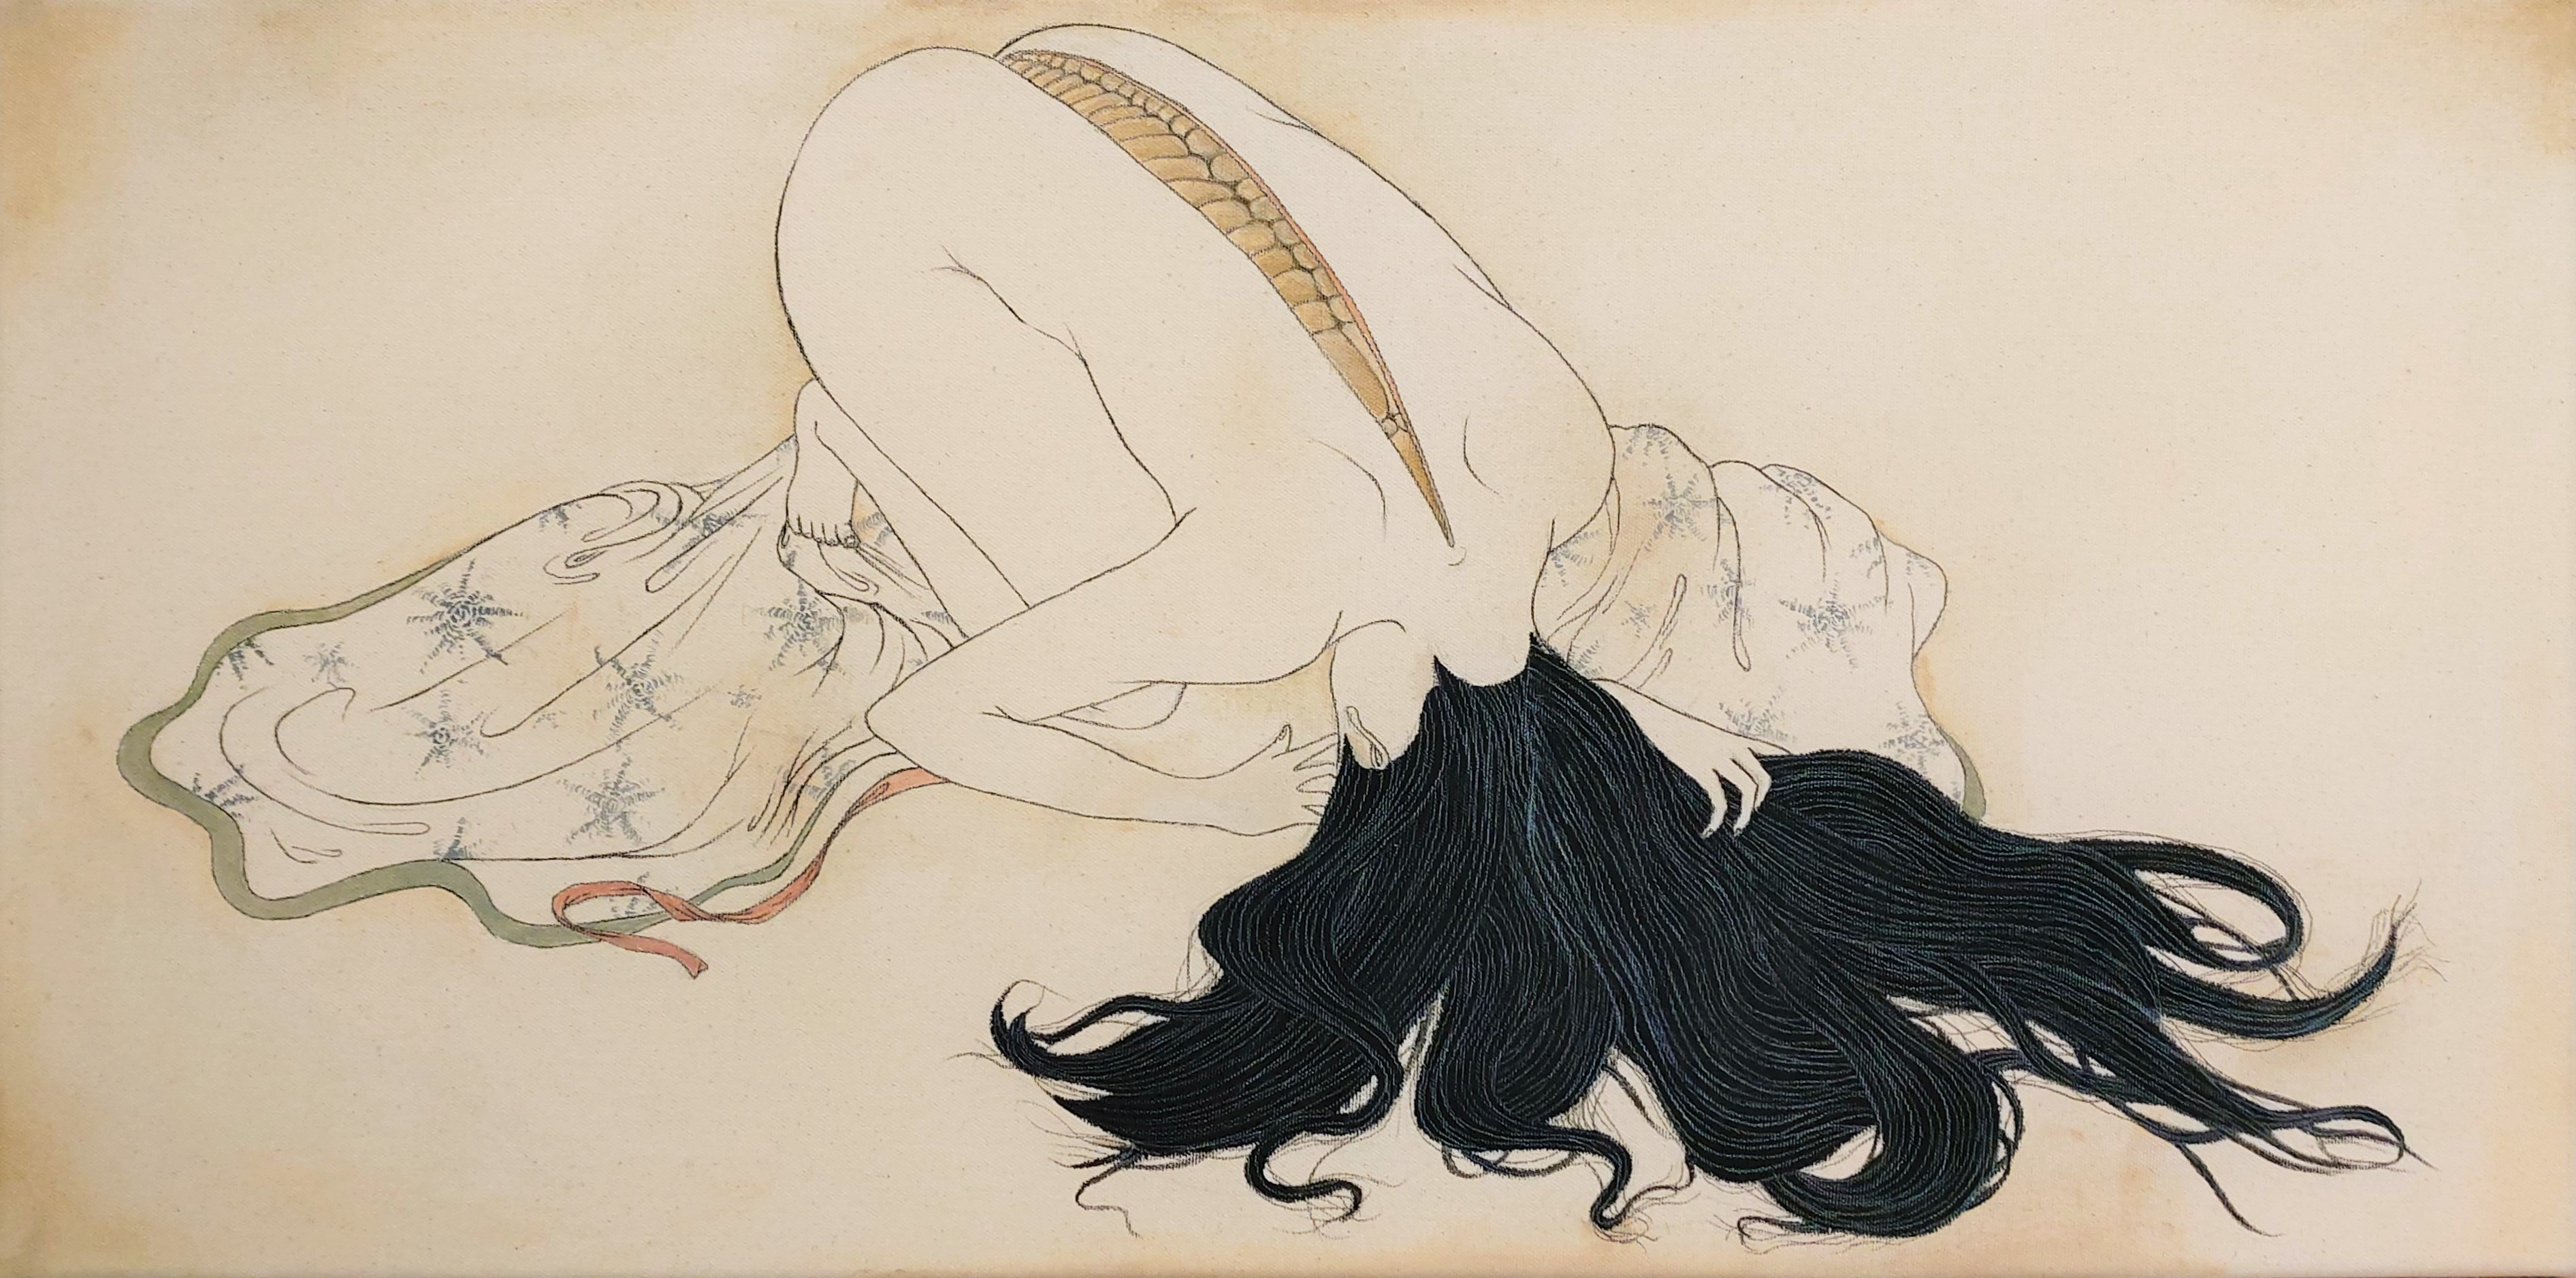 "Regarding the notion of regret as a physical manifestation with an impulse to emerge within a person, I presented it as a protective shell, much like the chrysalis of an insect.
Inspired by shunga masters such as Kitagawa Utamaro, the cloth pooled on the floor, as well as the nudity point to a displaced sense of eroticism, contrasting the grotesque nature of the piece. While a chrysalis can symbolize protection and concealment of said "regret", it also signifies an inevitable emergence."